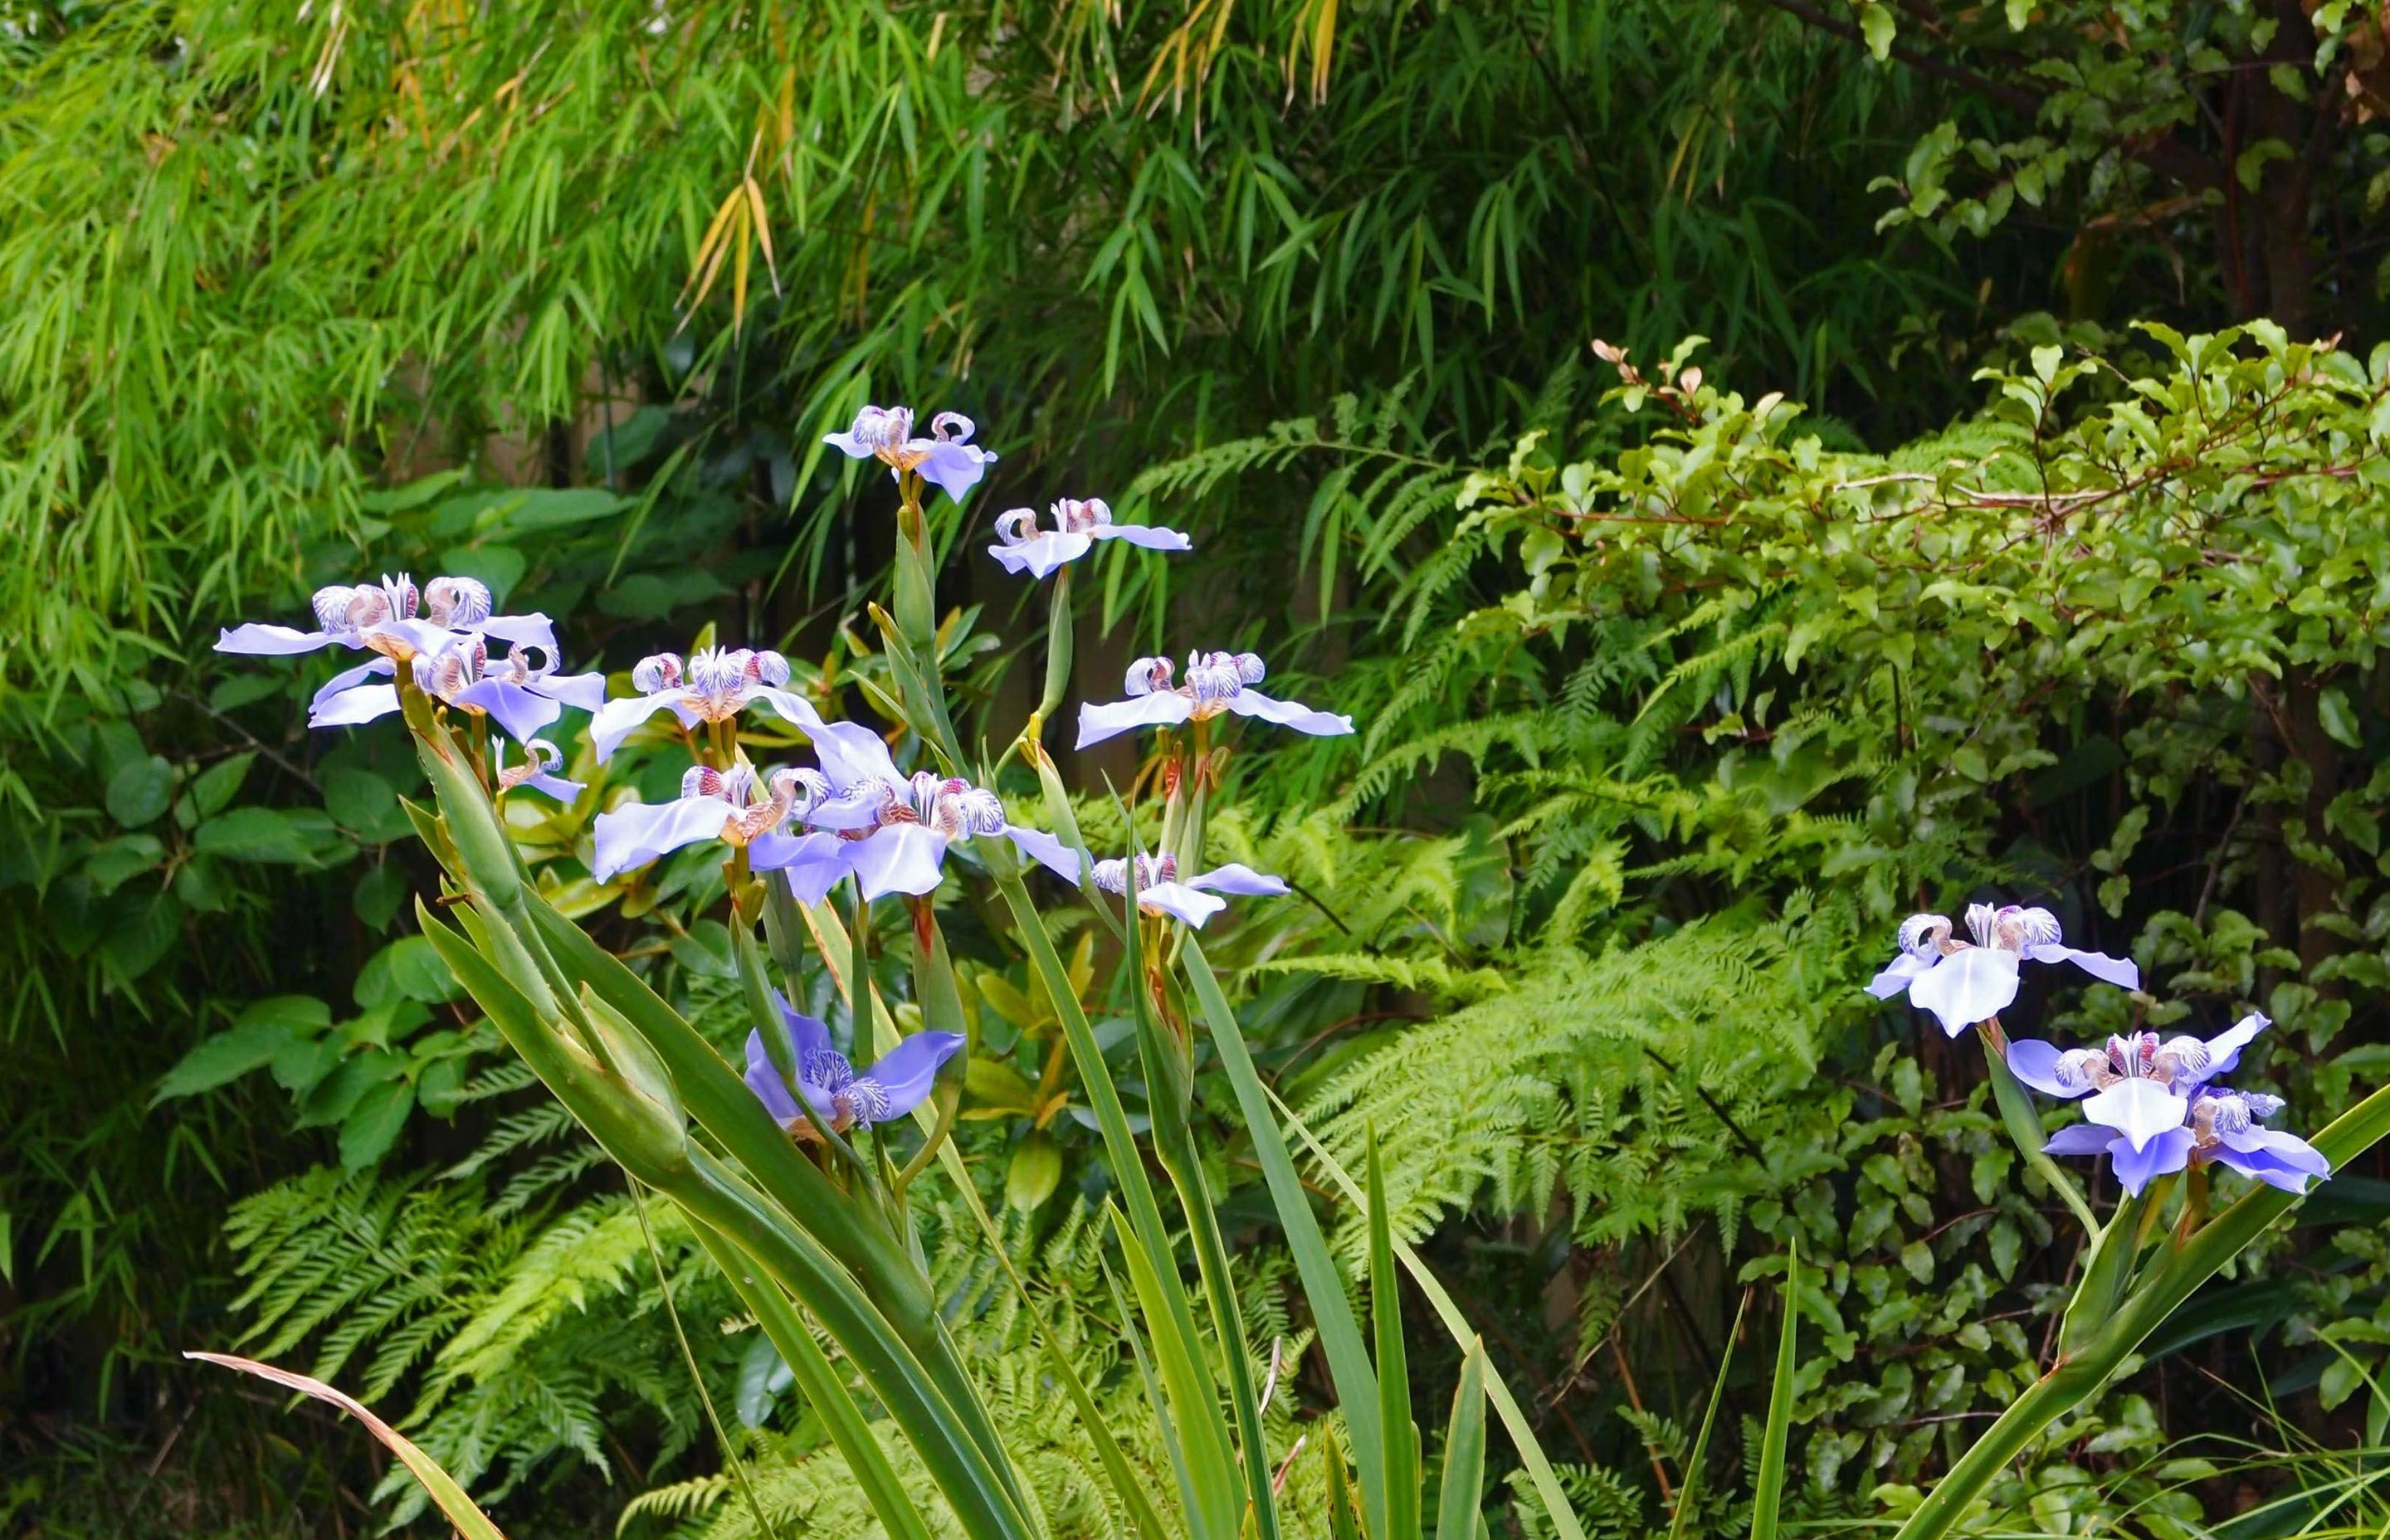 The detailed markings and elegant form of the flowers of walking iris are captivating.